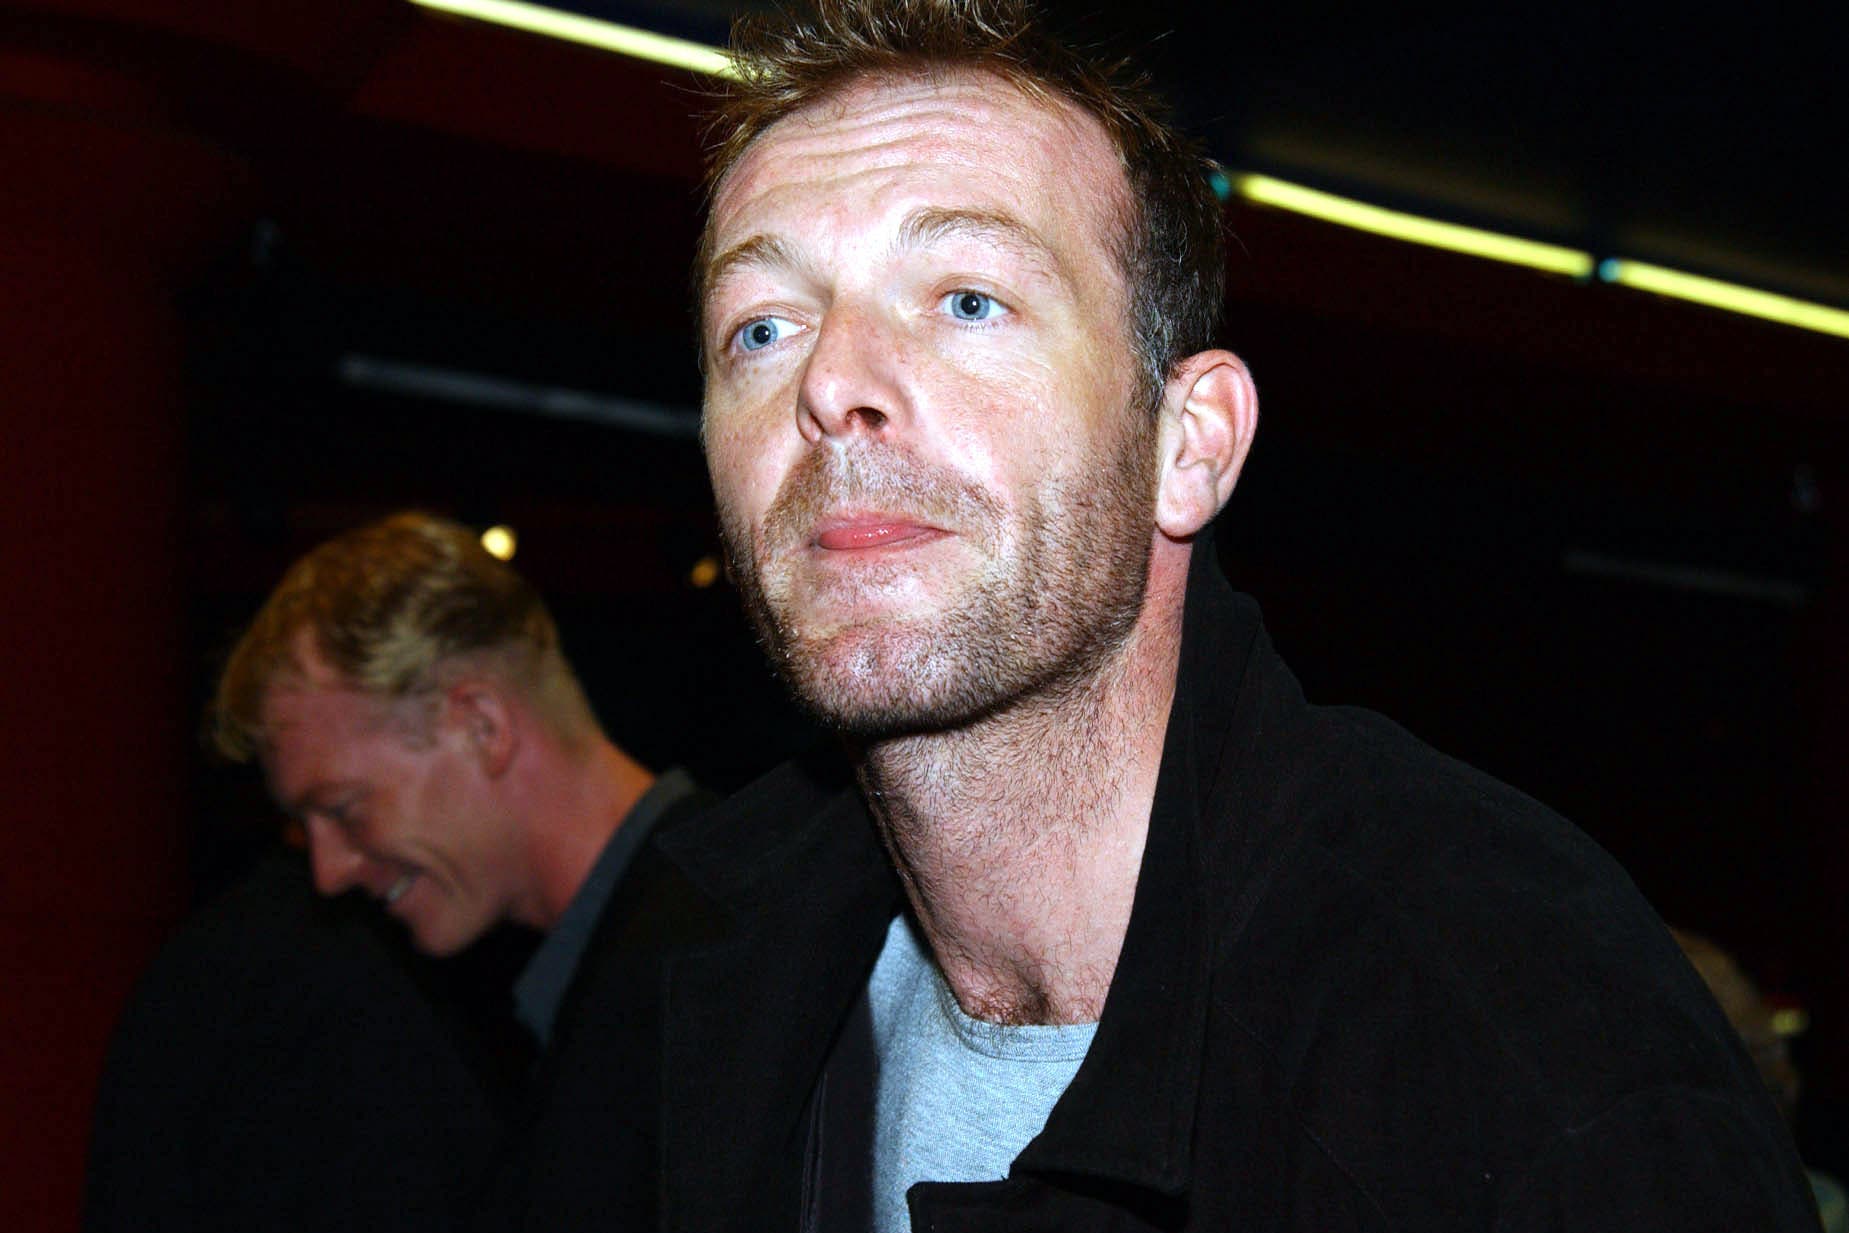 Hugo Speer sacked from Full Monty reboot after ‘inappropriate conduct’ claims